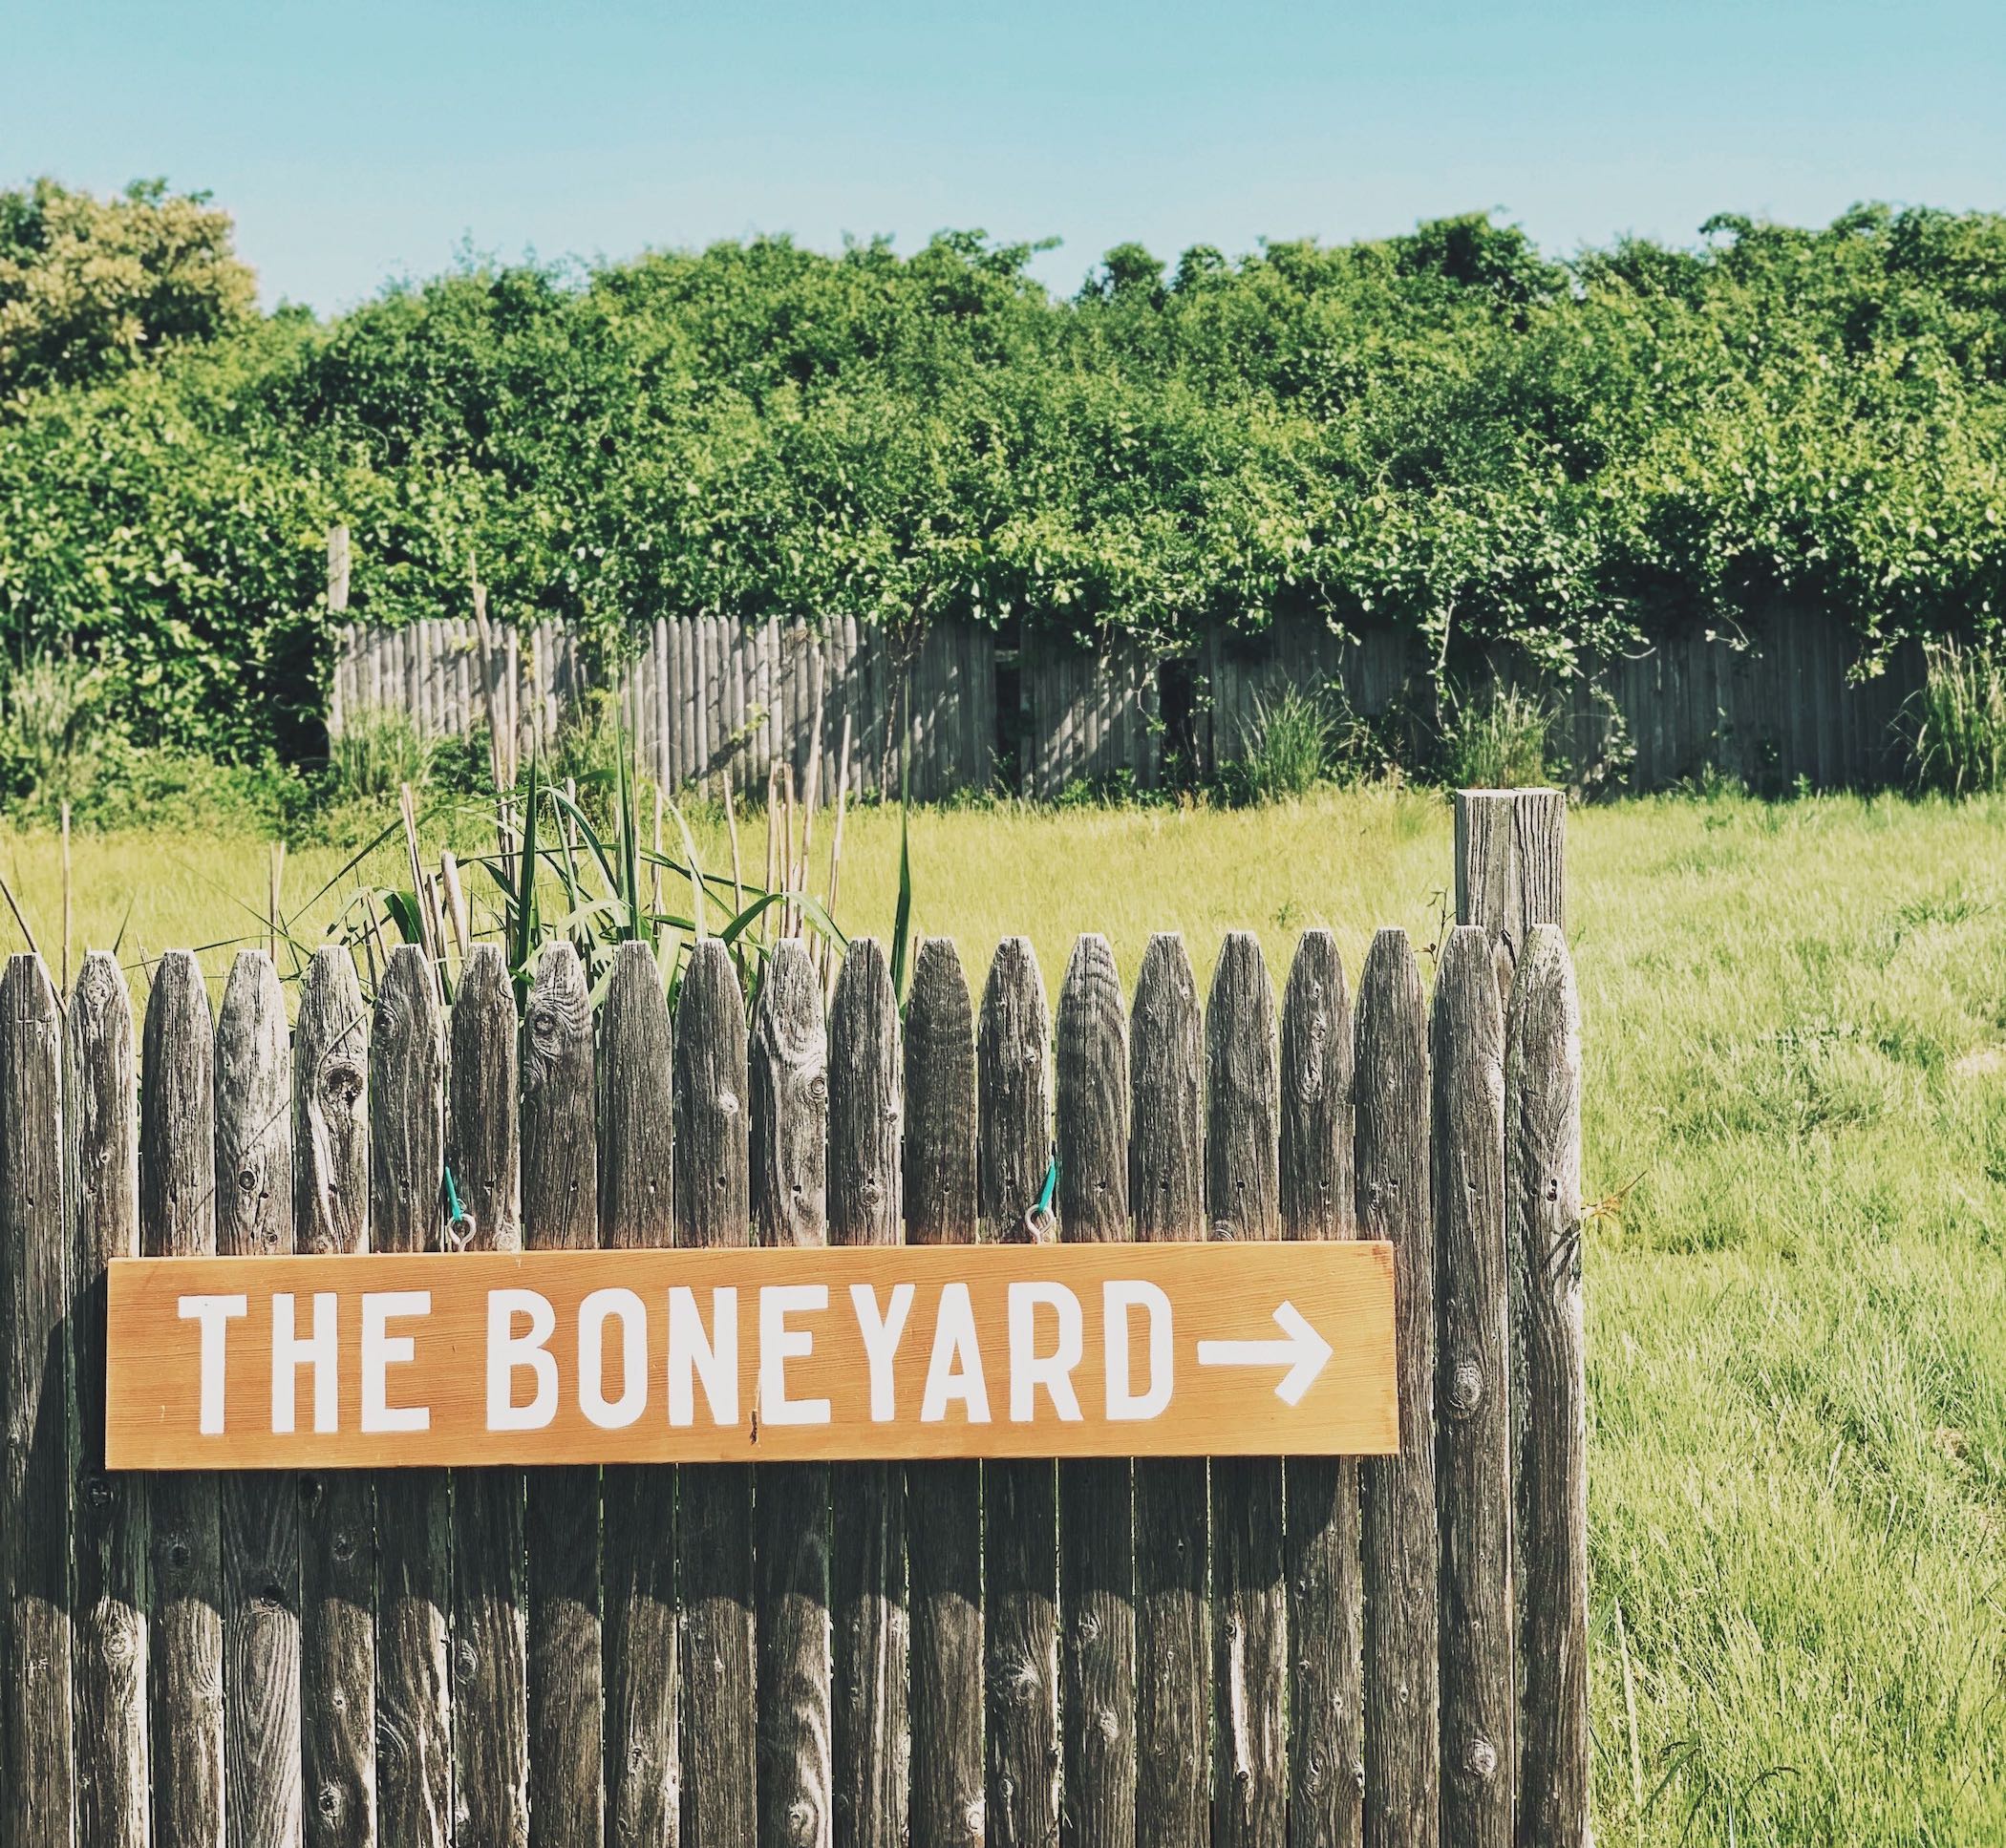 the boneyard fence with hand painted sign that says "the boneyard"